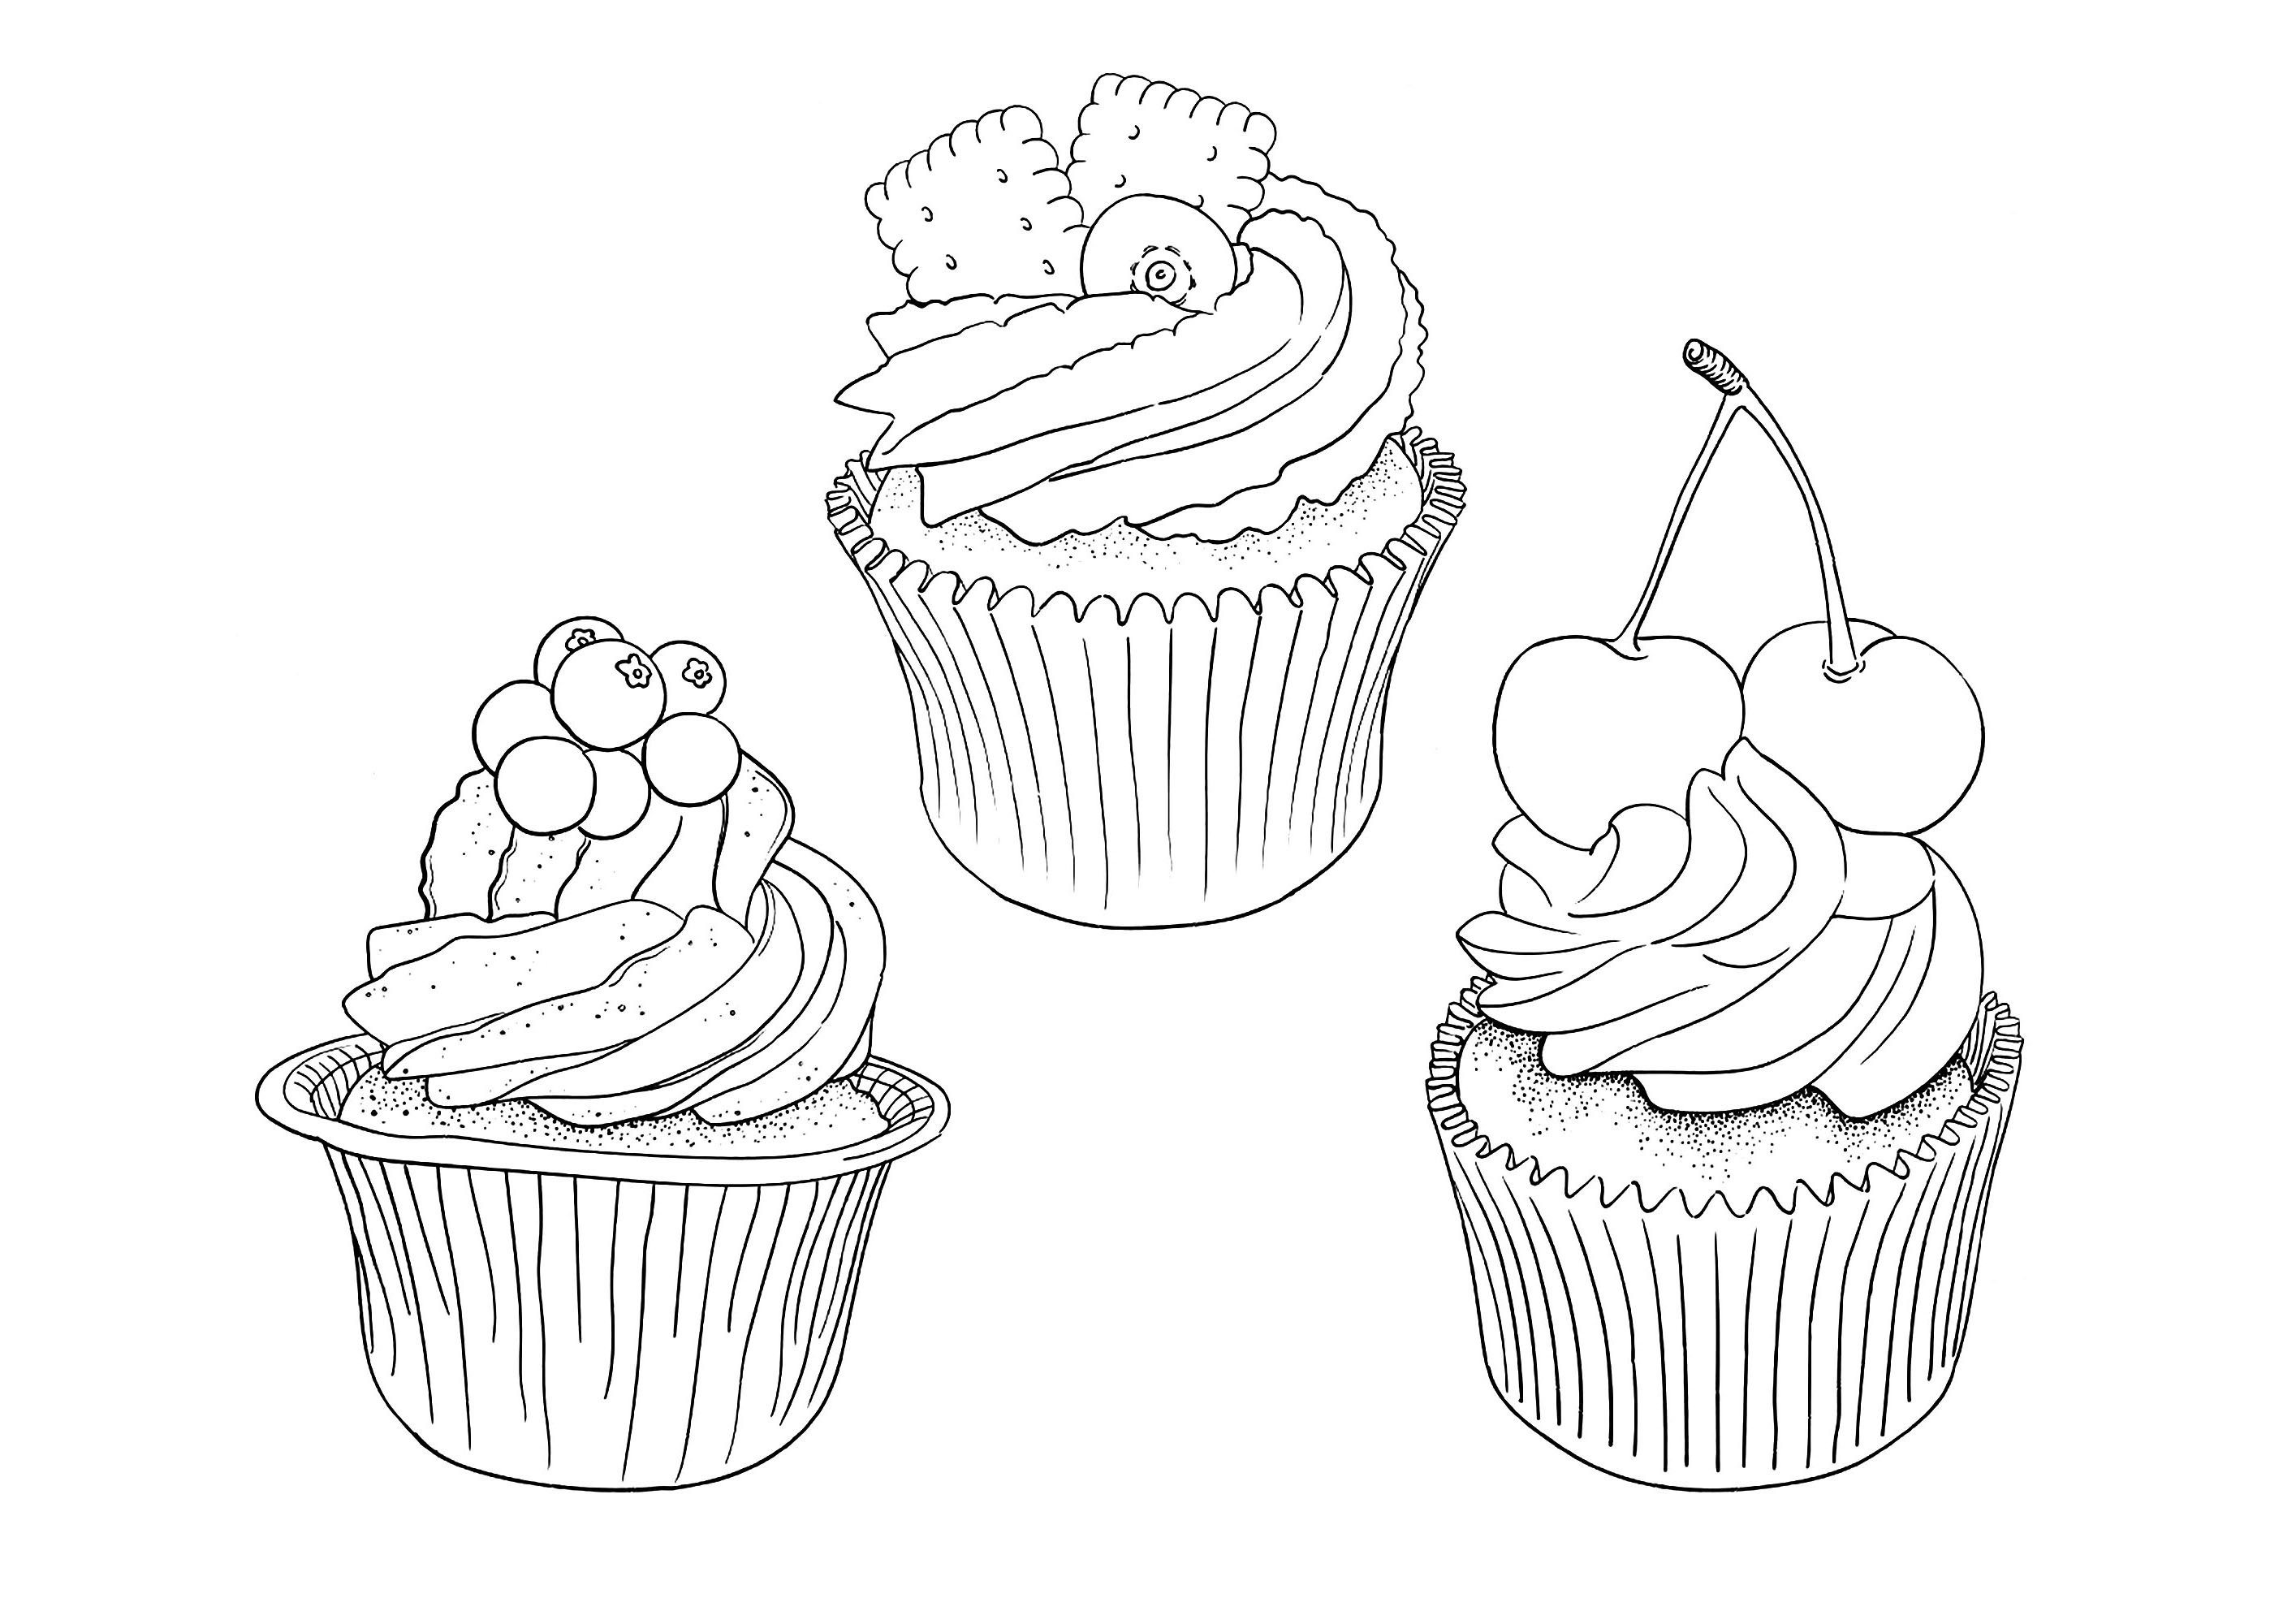 Cup Cake Coloring Book For Kids: Cup Cake Coloring Books for Kids Ages 4-8  - girls, boys, toddlers, Preschool and Kindergarten.